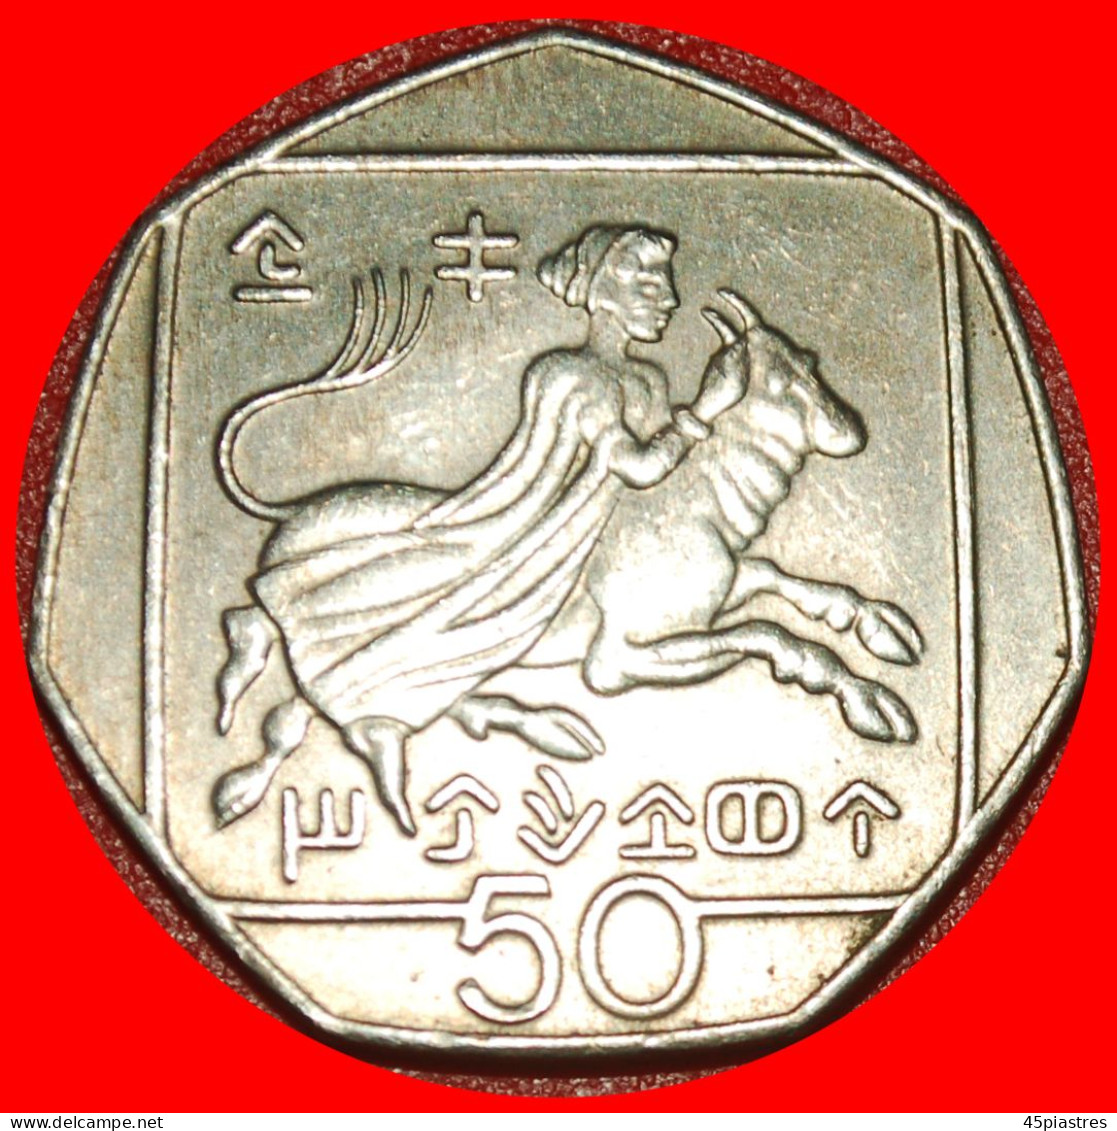 * SLOVAKIA (1991-2004): CYPRUS  50 CENTS 2002 MINT LUSTRE HEPTAGON~ABDUCTION OF EUROPA!· LOW START ·  NO RESERVE! - Chipre